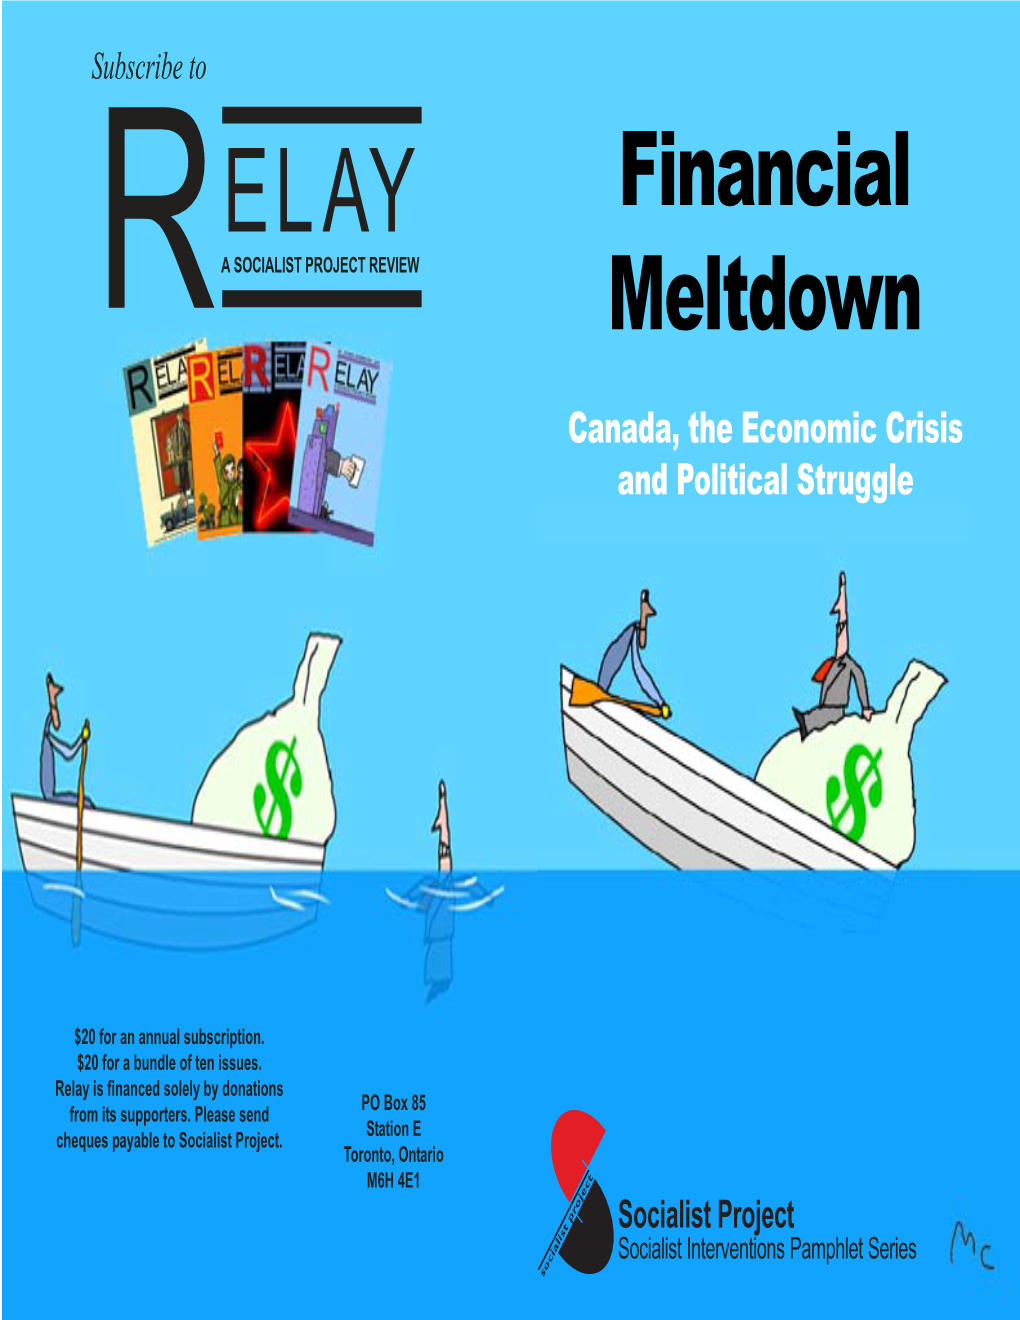 Financial Meltdown: Canada, the Economic Crisis and Political Struggle 4.1 Economic Crisis and the Poor: Probable Impacts, Prospects for Resistance